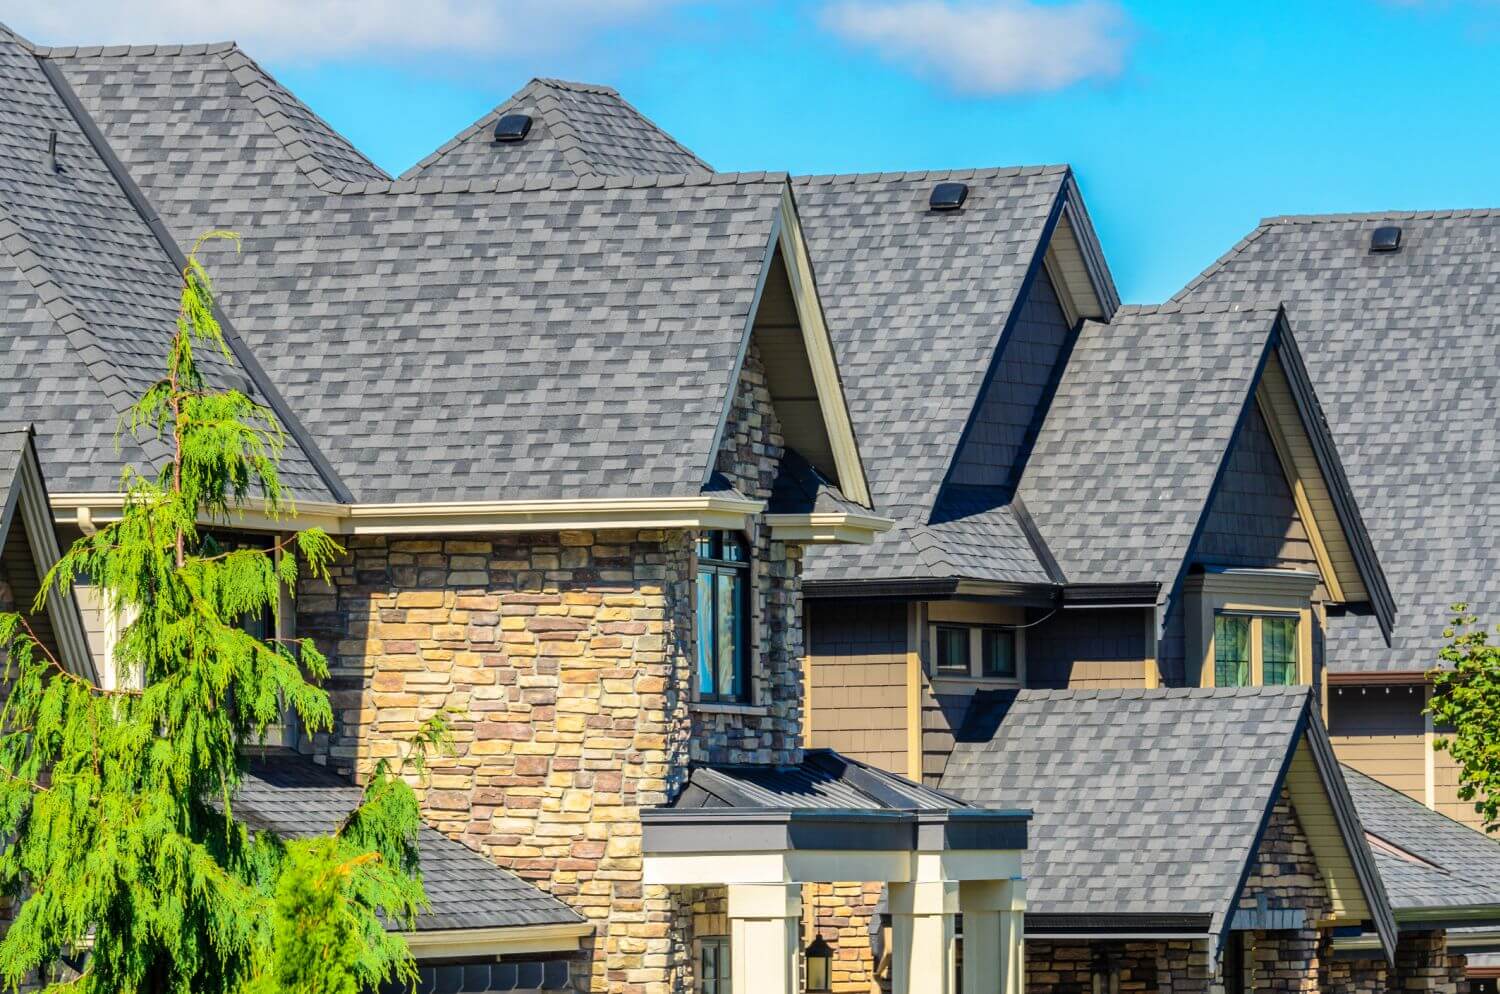 How Do Solar Reflective Shingles Work and Are They Worth the Cost?